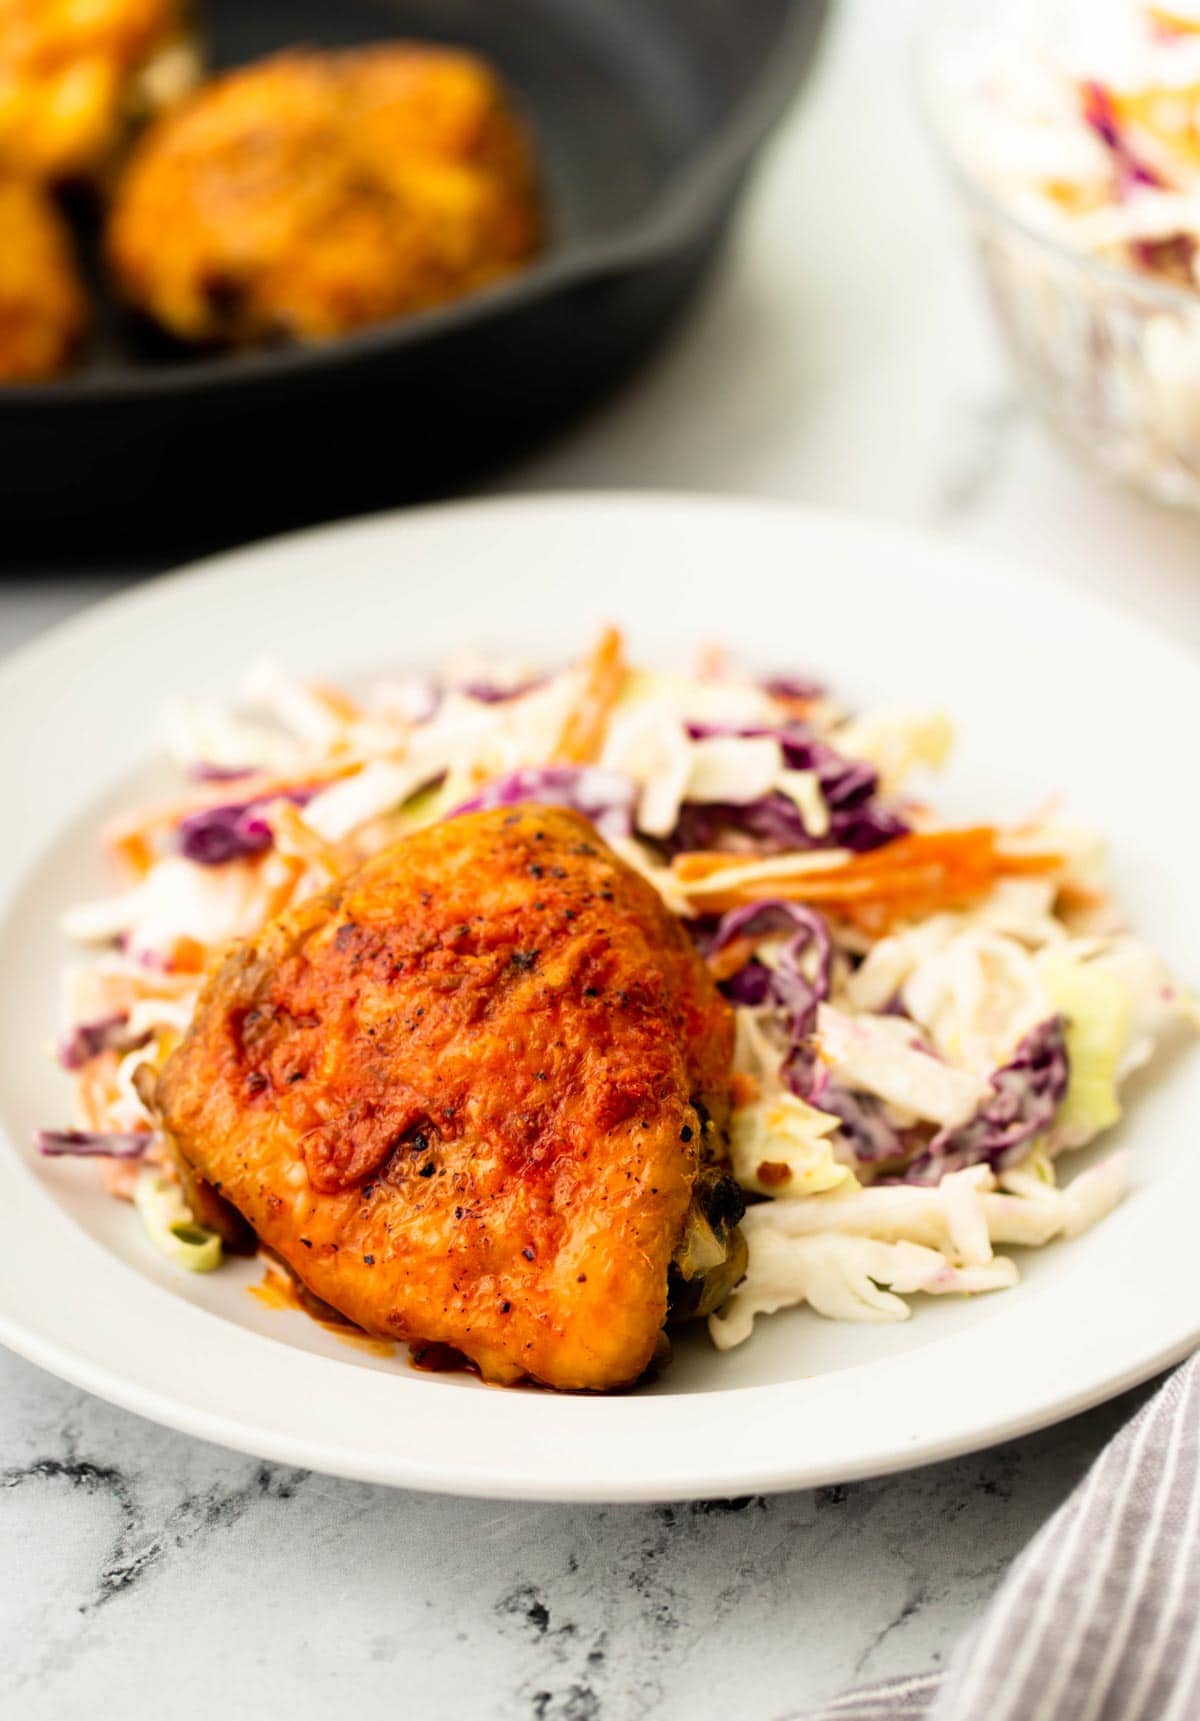 Crispy chicken thighs on a white plate with coleslaw and a cast iron pan in the back.